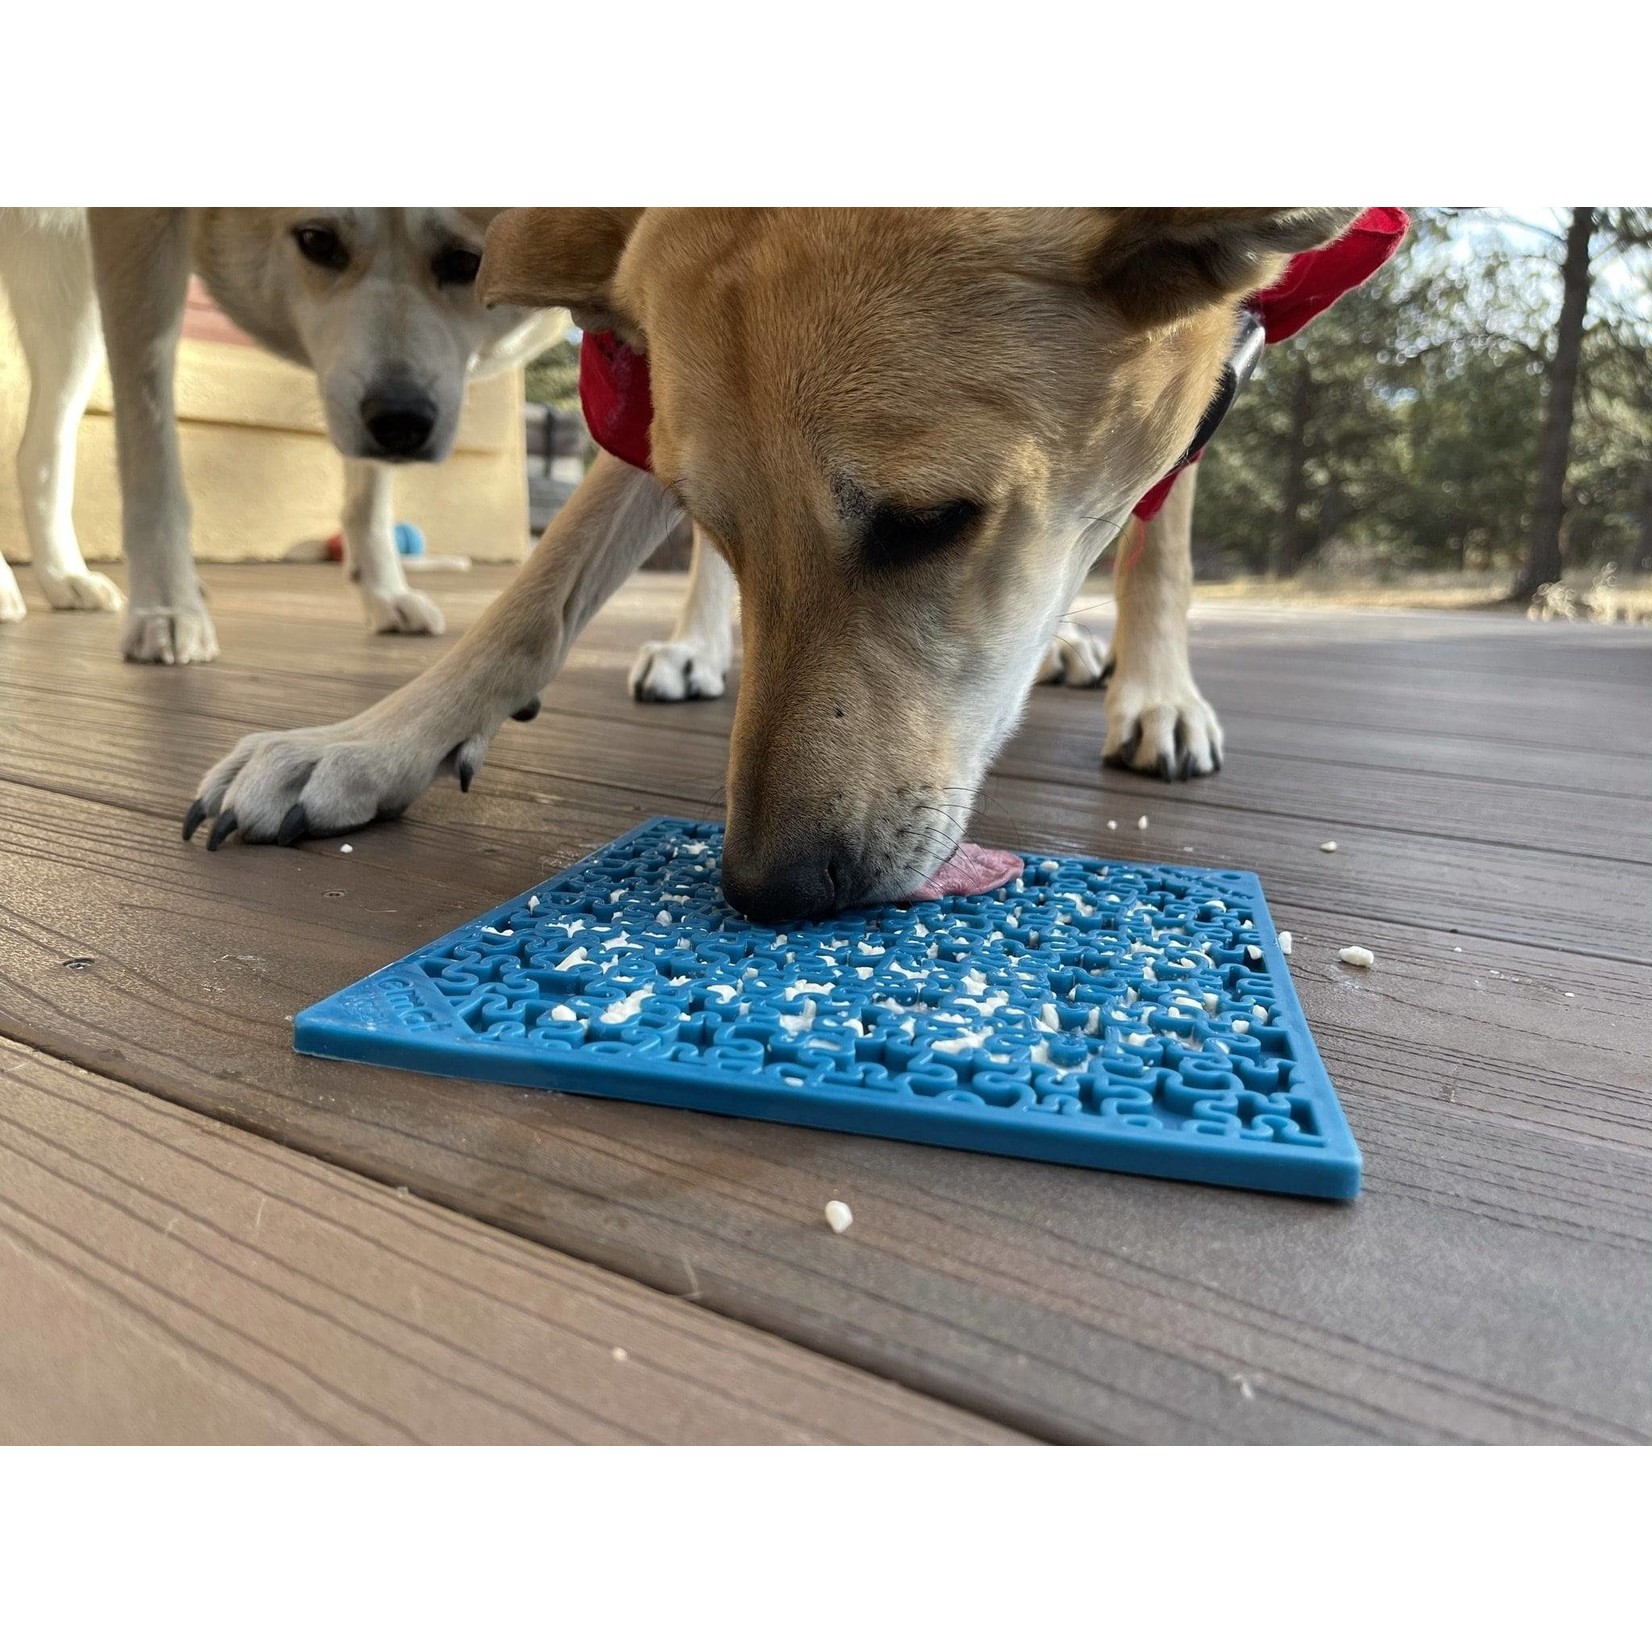 Sodapup Sodapup Enrichment Lick Mats for Cats and Dogs